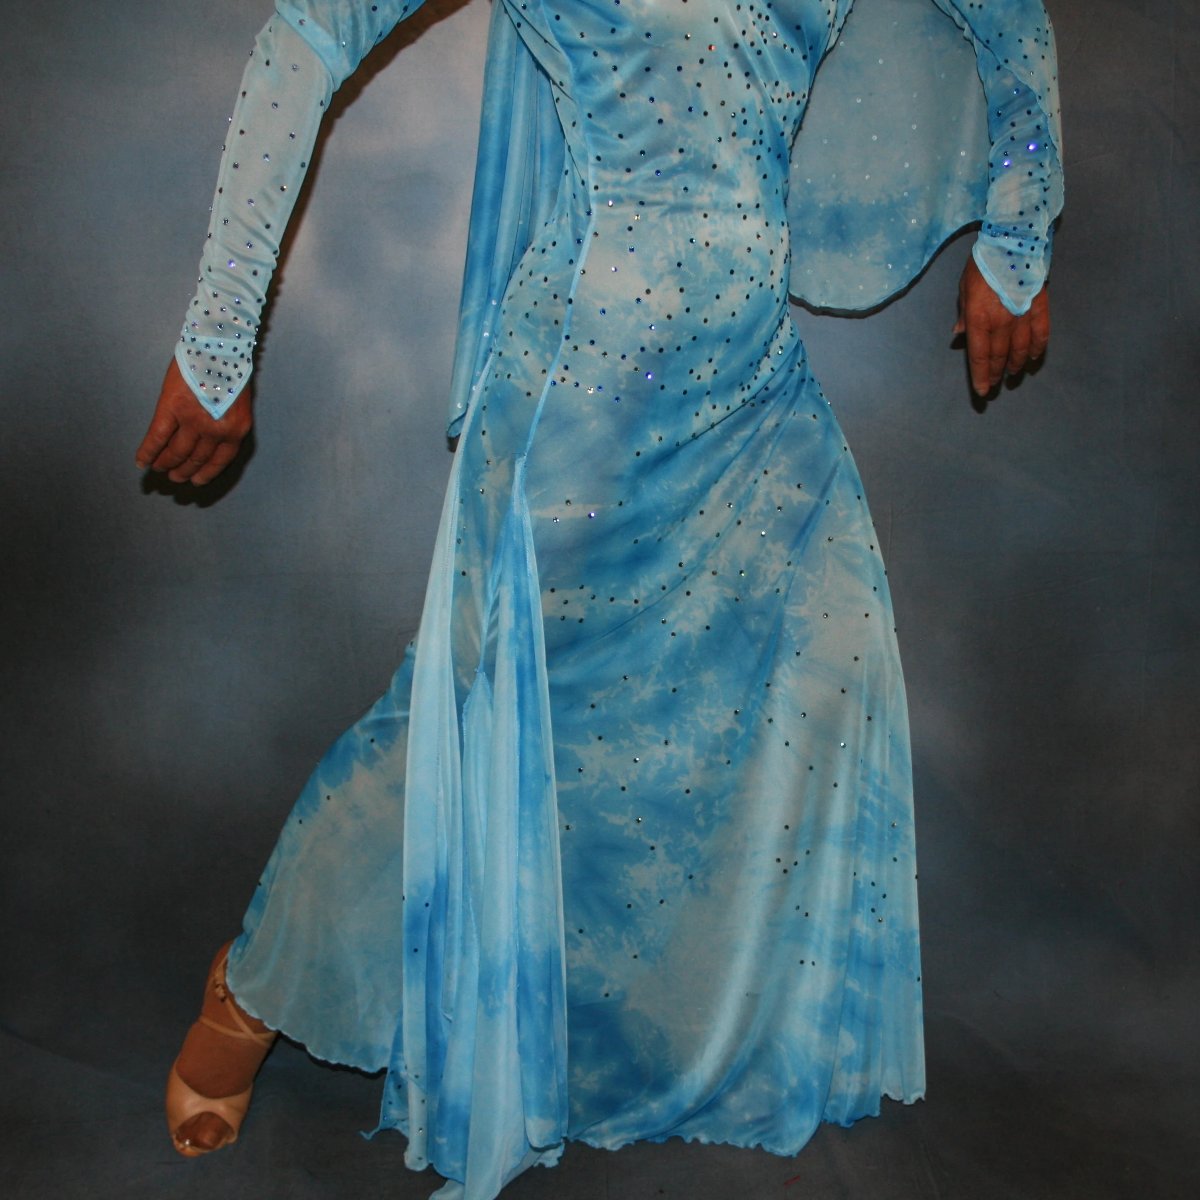 Crystal's Creations close up bottom view of Elegant blue ballroom dress created in shades of blue printed semi sheer stretch with floats, fabulous for a solo ballroom dance or a theatrical ballroom number…embellished with Swarovski rhinestone work in shades of capri blue & aquamarine